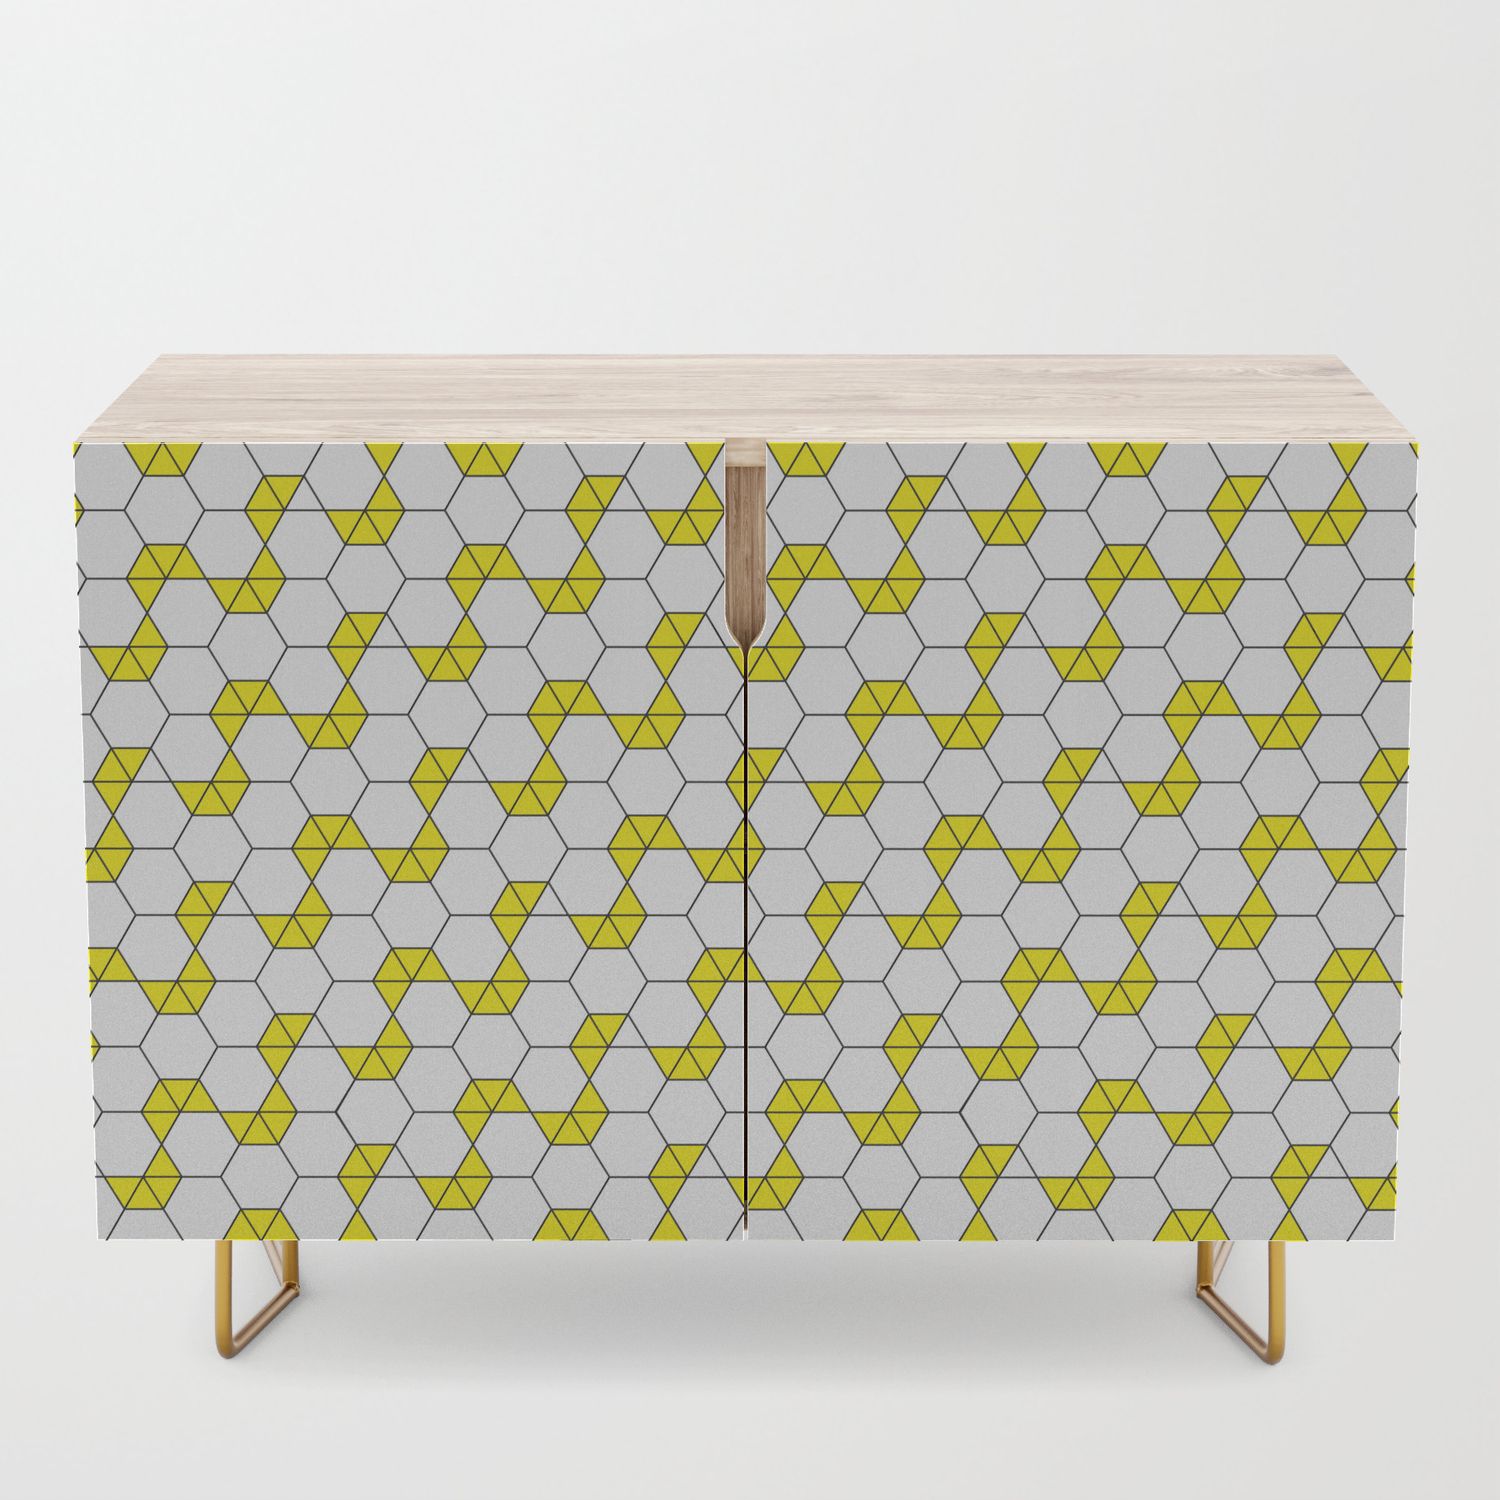 Geometric Pattern 47 (yellow Hexagon) Credenza Intended For Exagonal Geometry Credenzas (View 6 of 30)